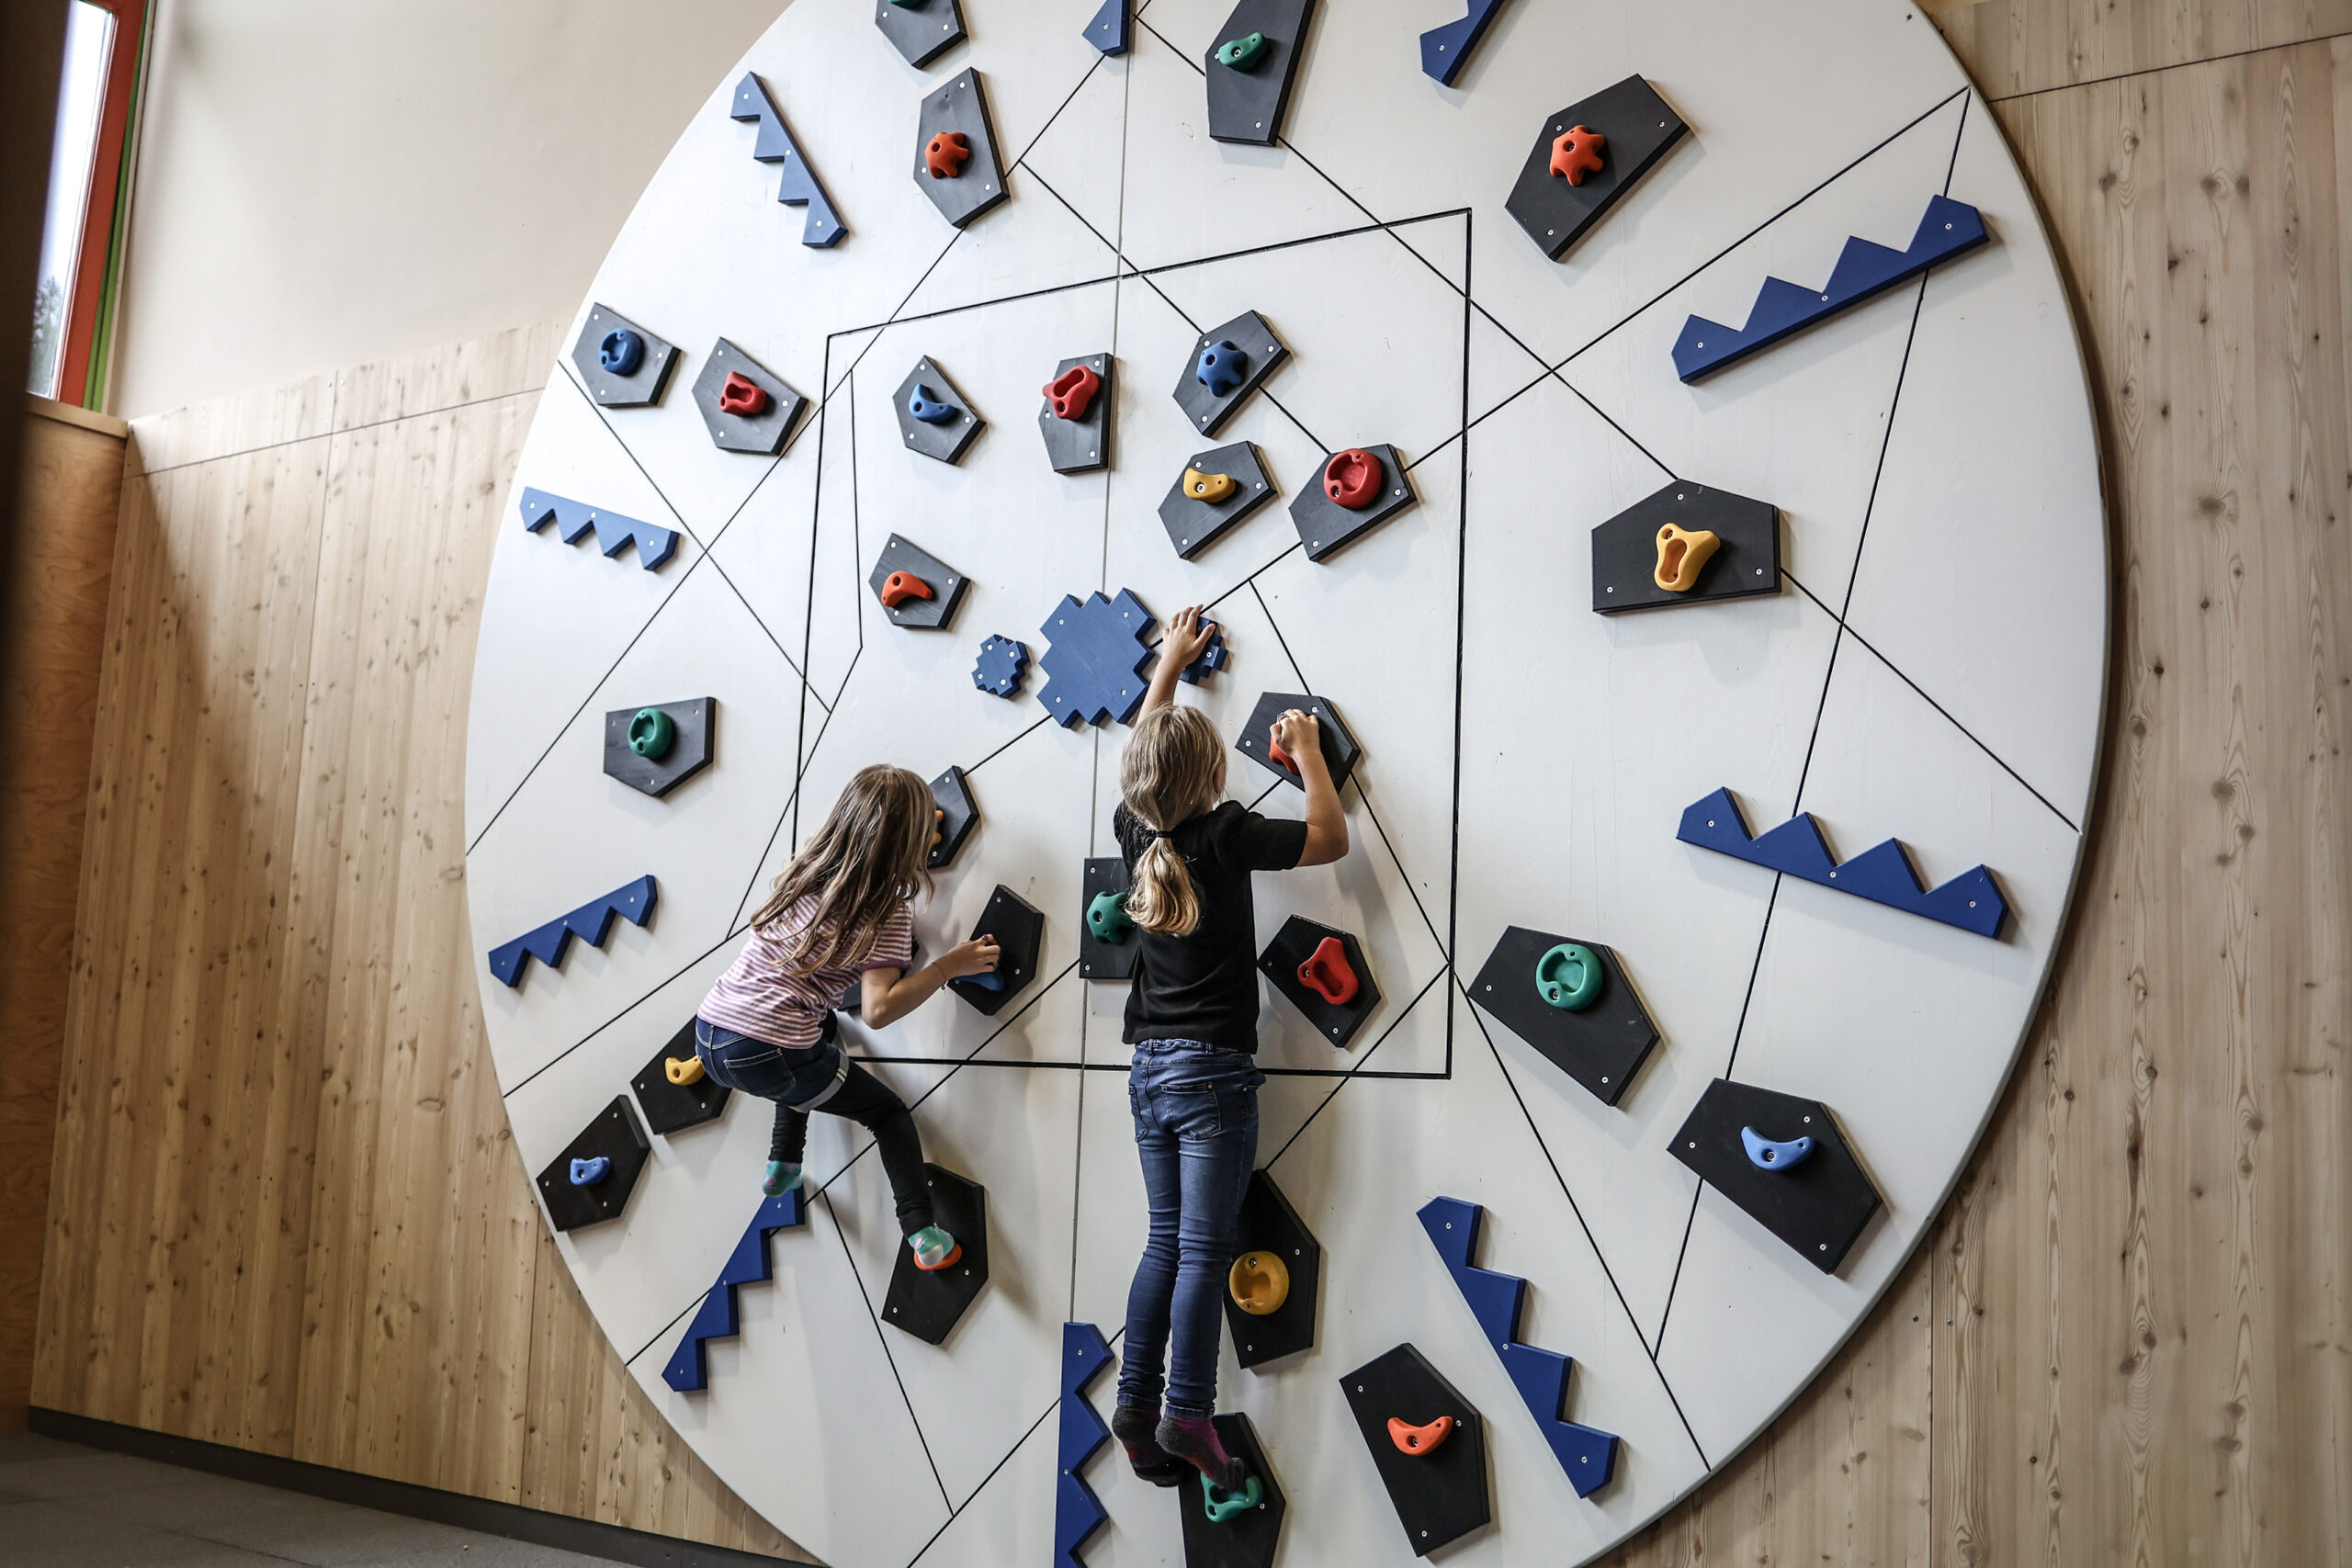 Climbing wall in the shape of a tunnel boring machine